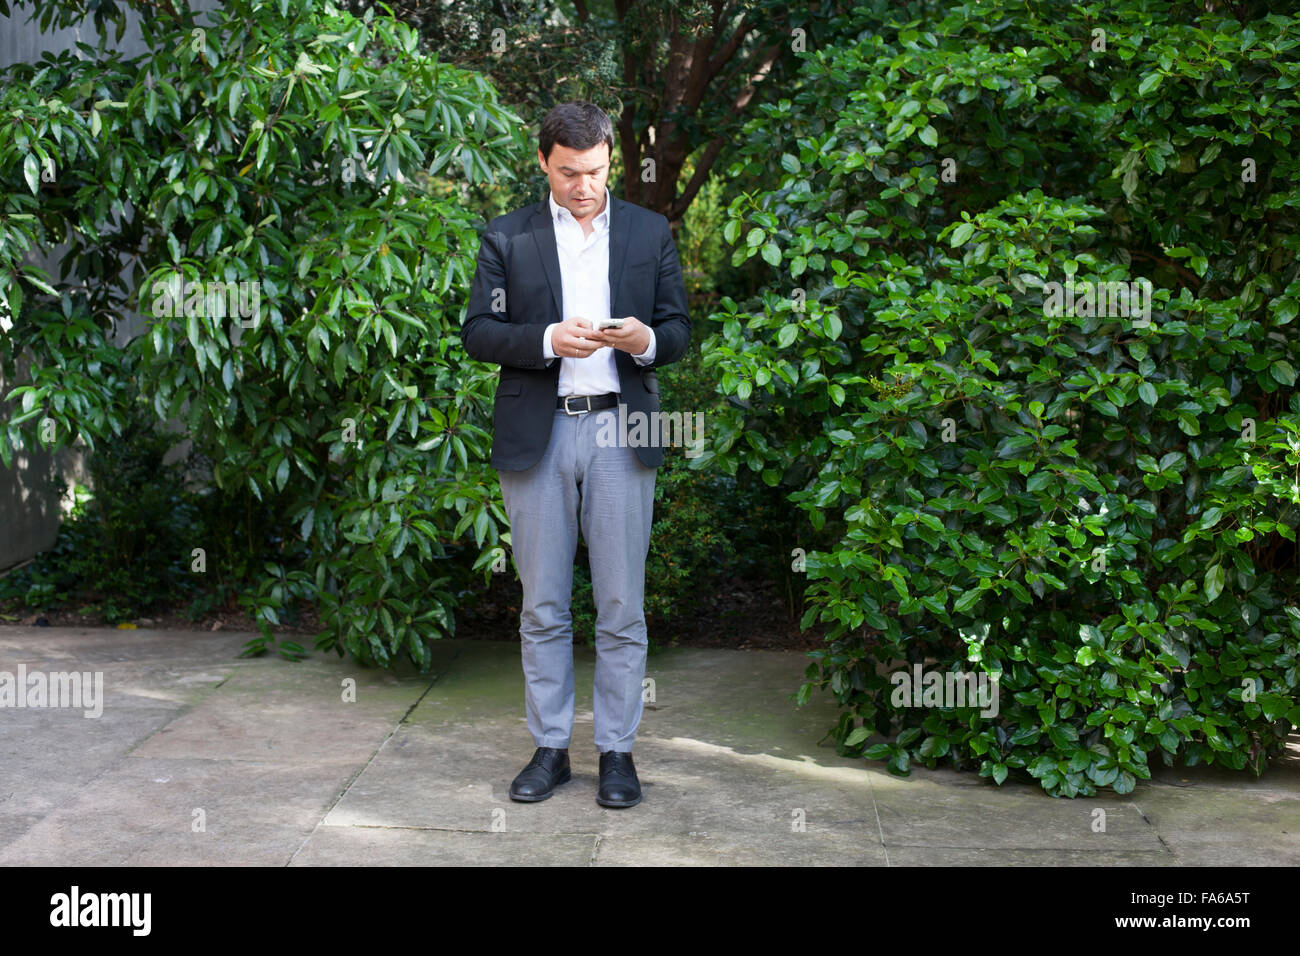 Thomas Piketty, French economist who works on wealth and income inequality, on a visit to Portugal. Stock Photo